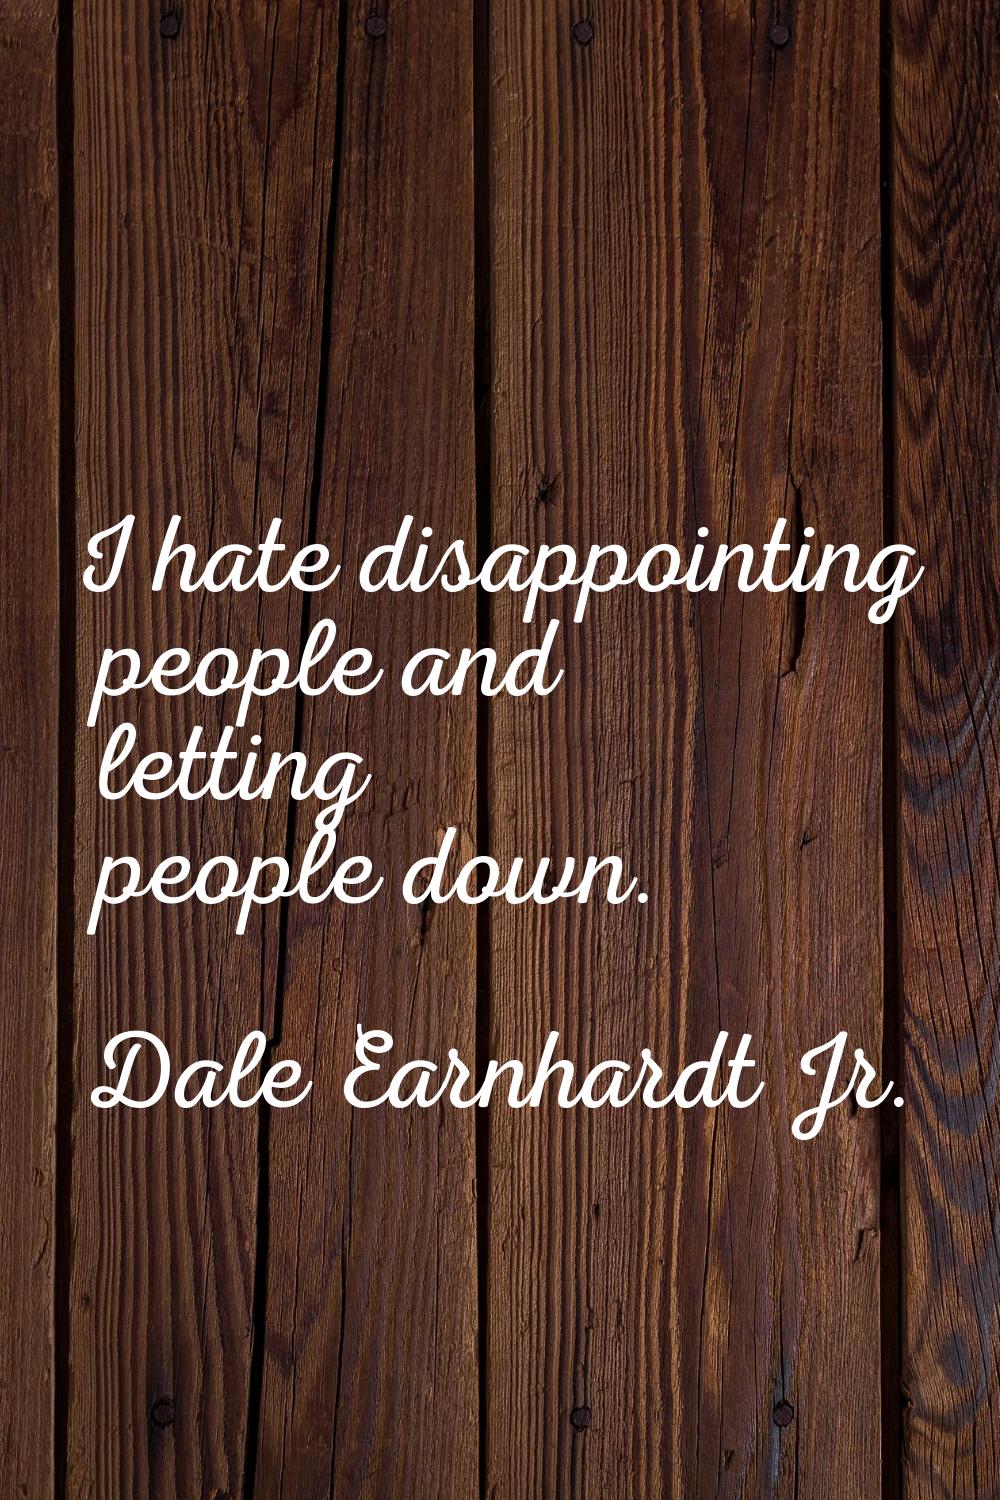 I hate disappointing people and letting people down.